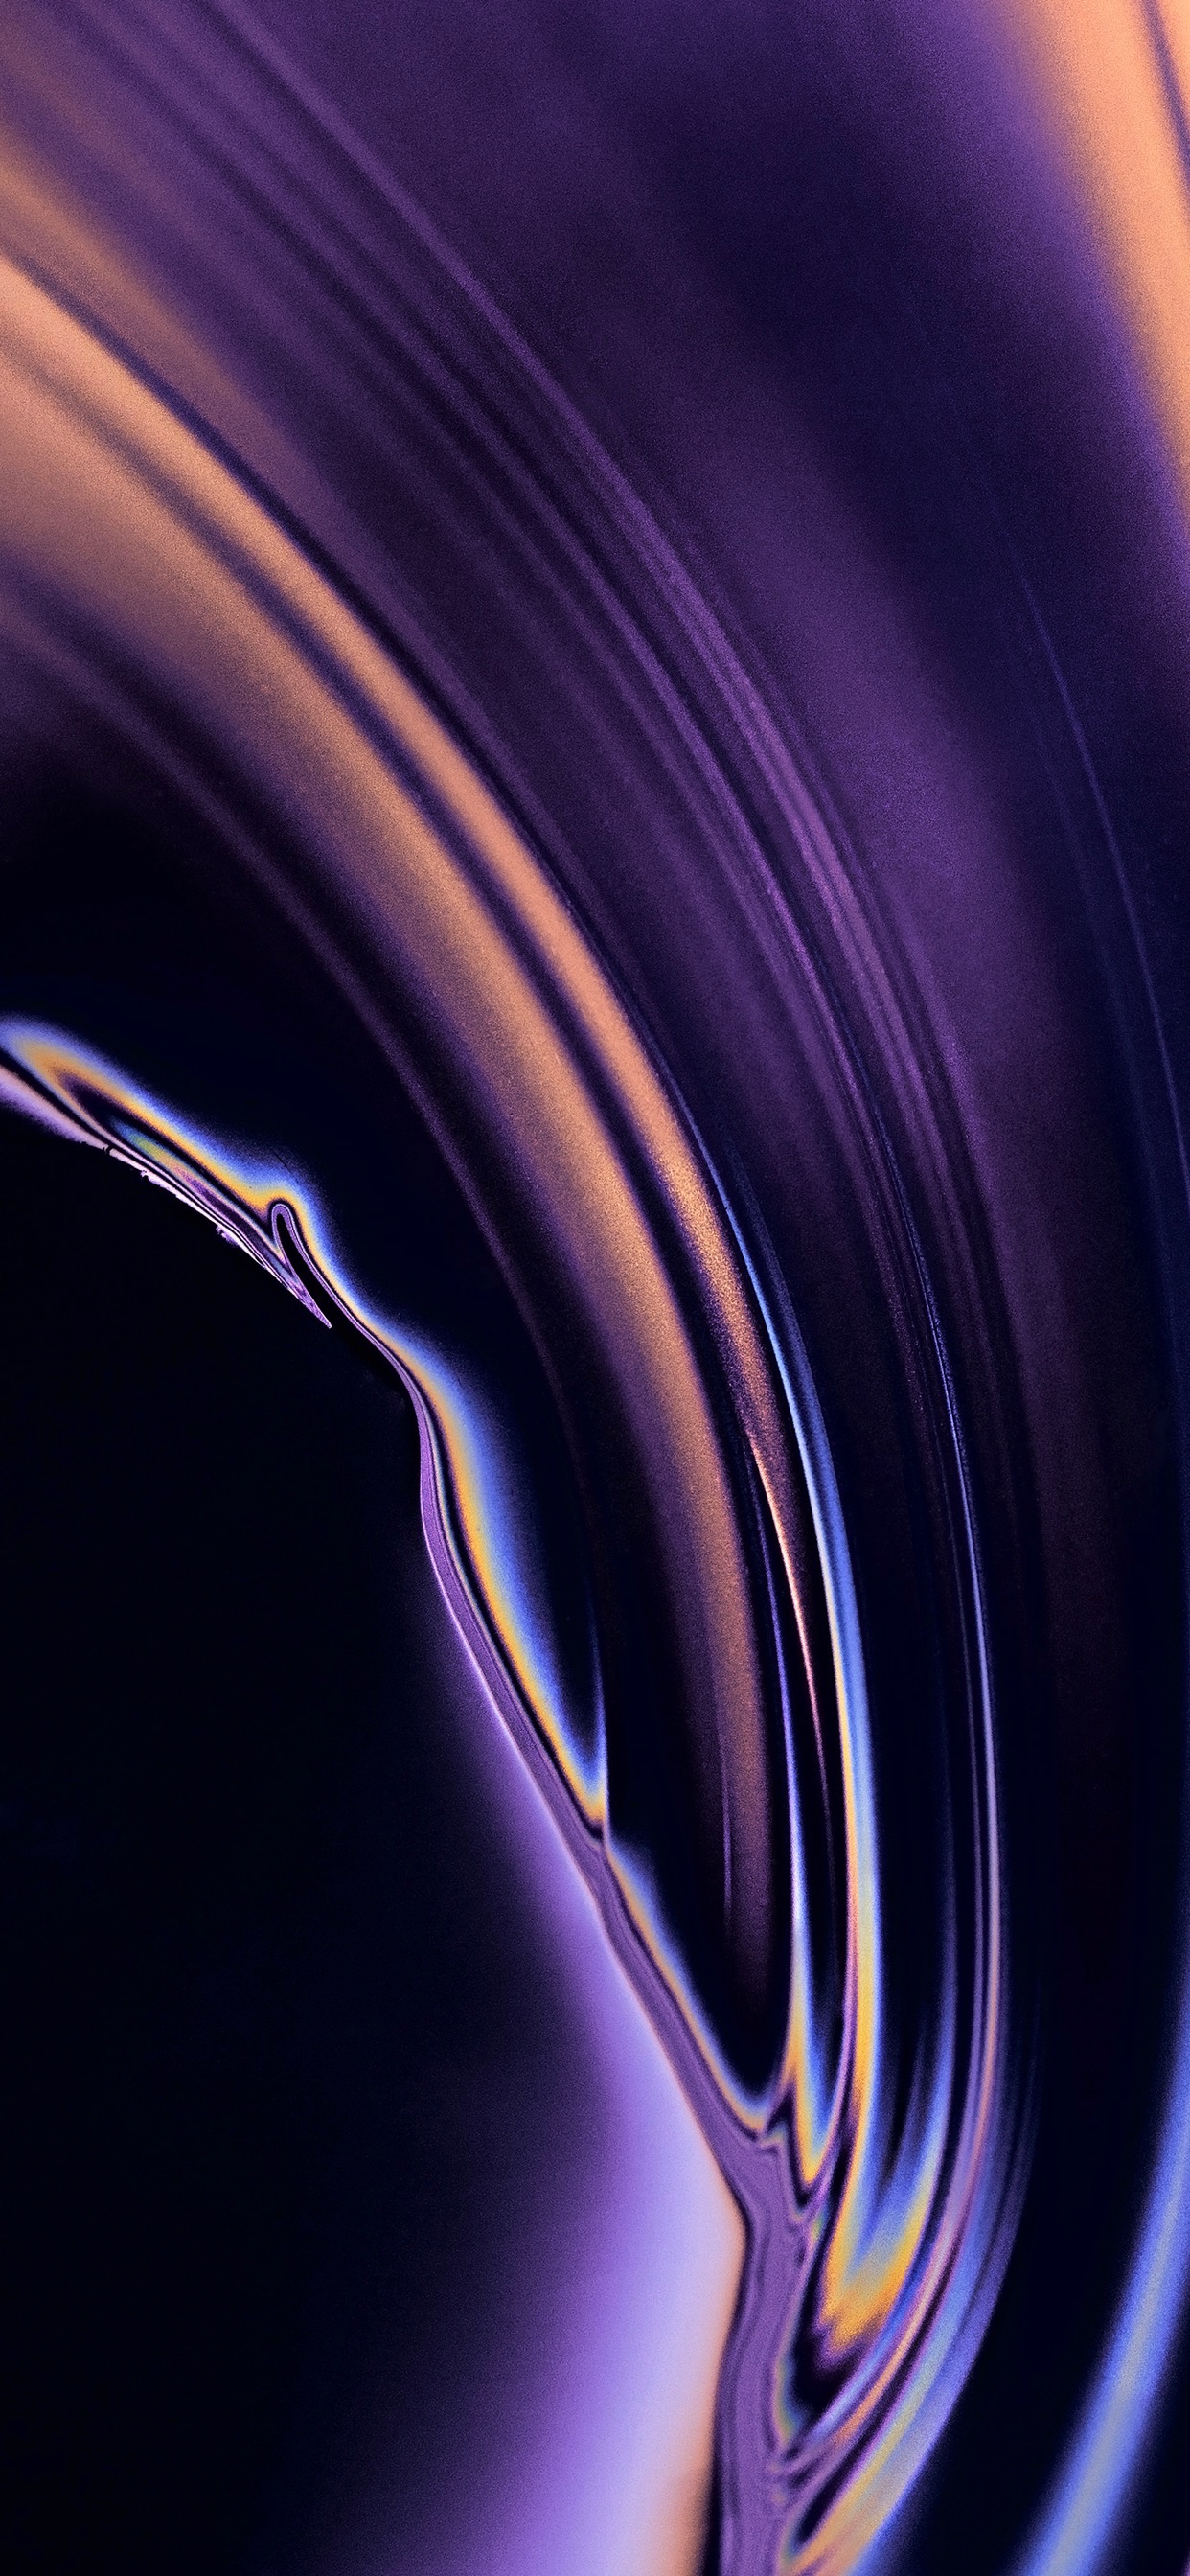 Wallpaper Weekends Abstract iPhone Wallpapers From the macOS